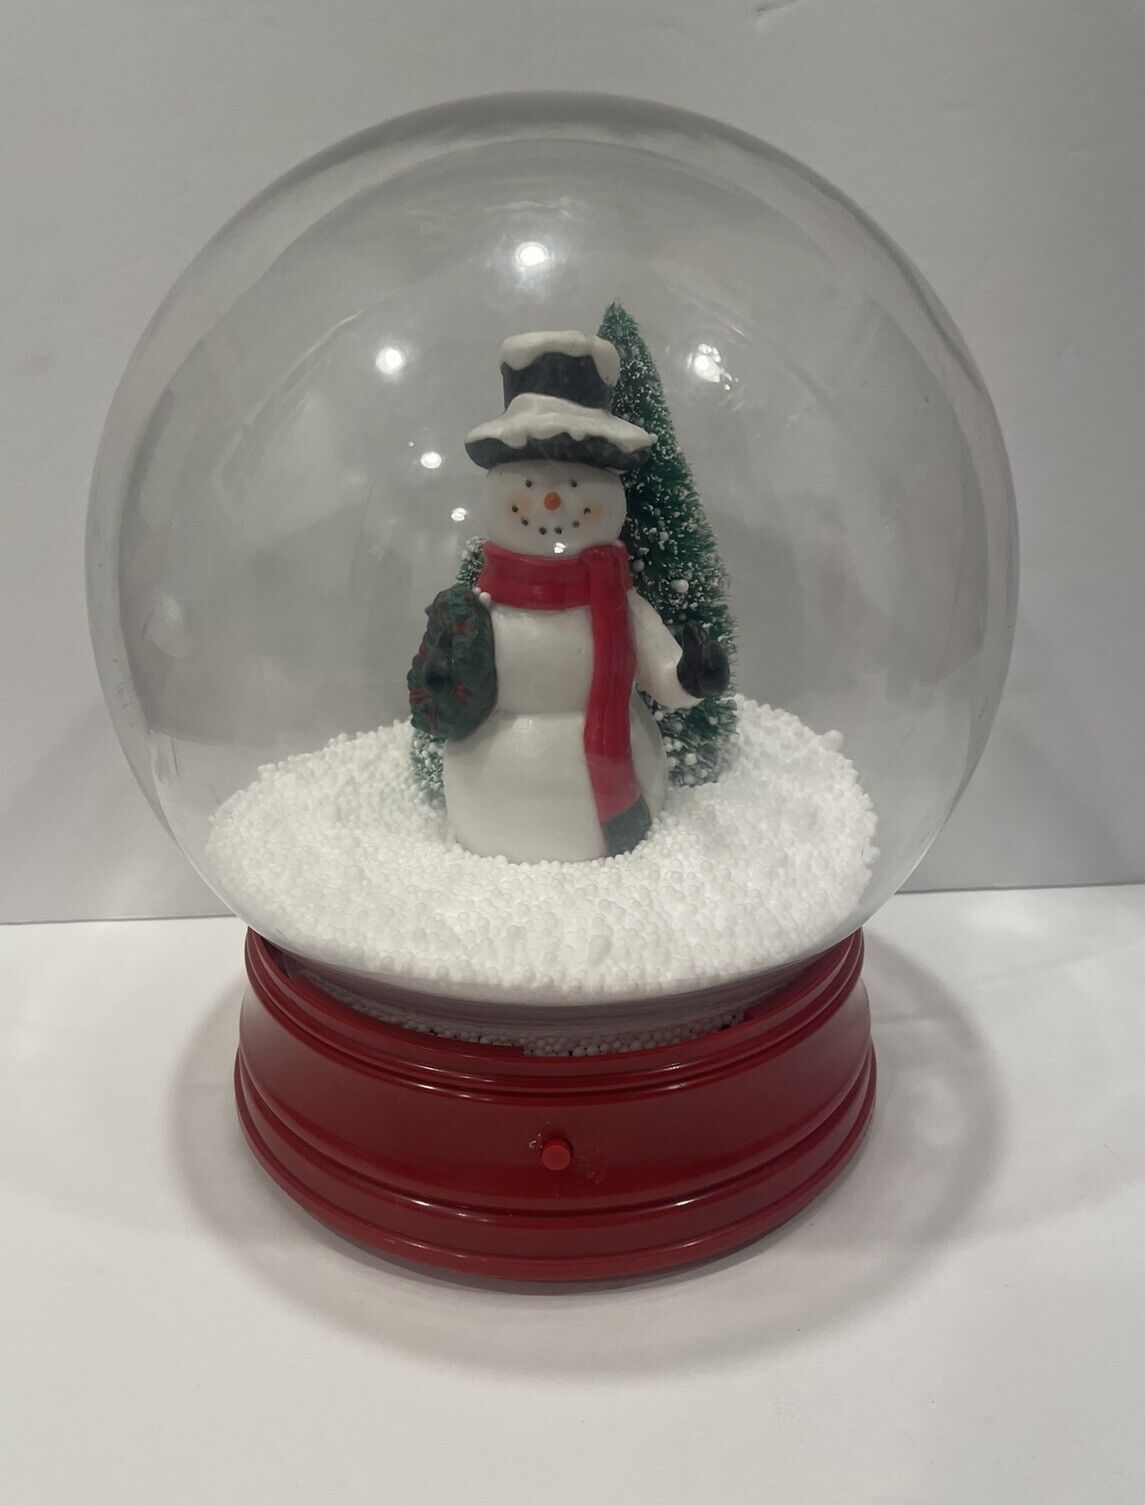 Snowman In Snow Globe Battery Operated 9”Lights Plays Xmas Songs. See VIDEO